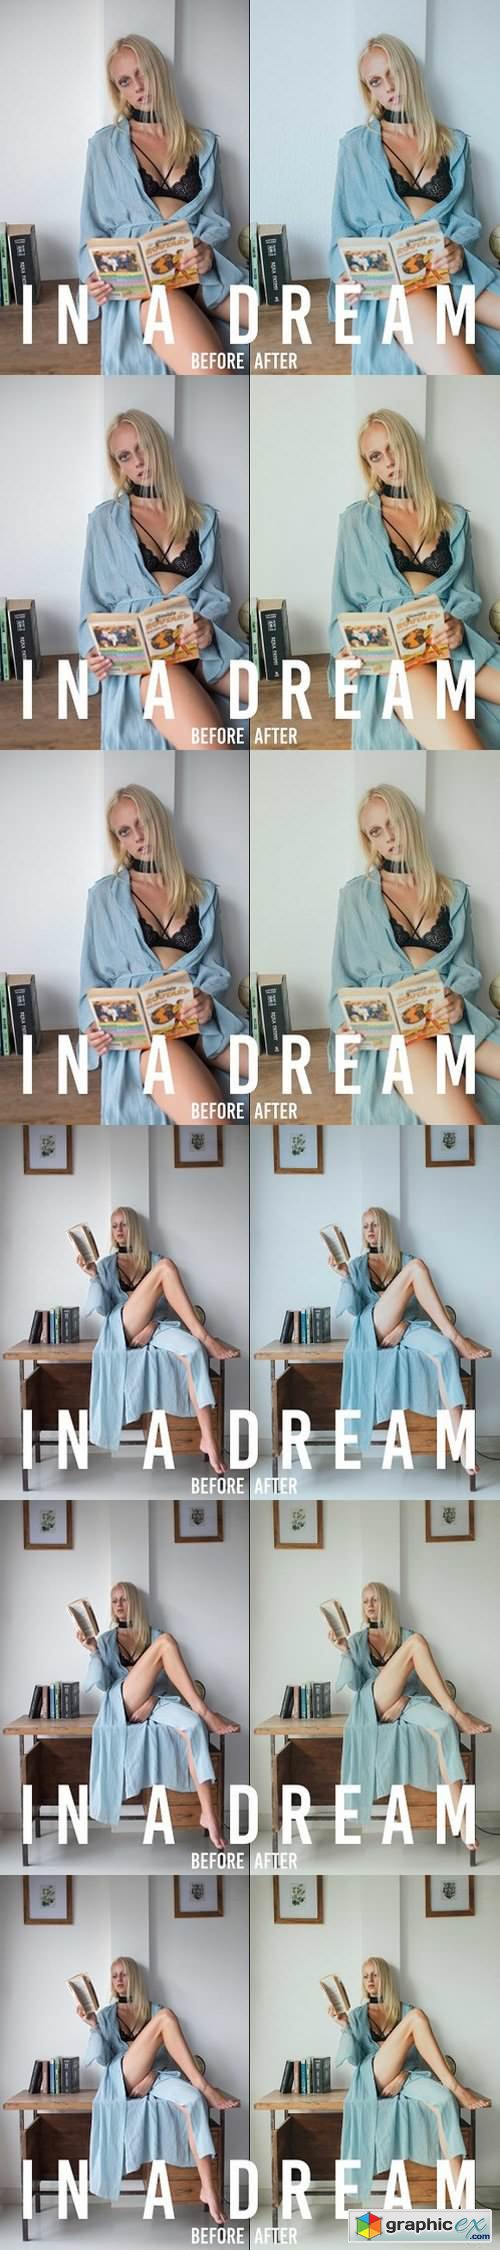 In A Dream // Lifestyle LR Presets